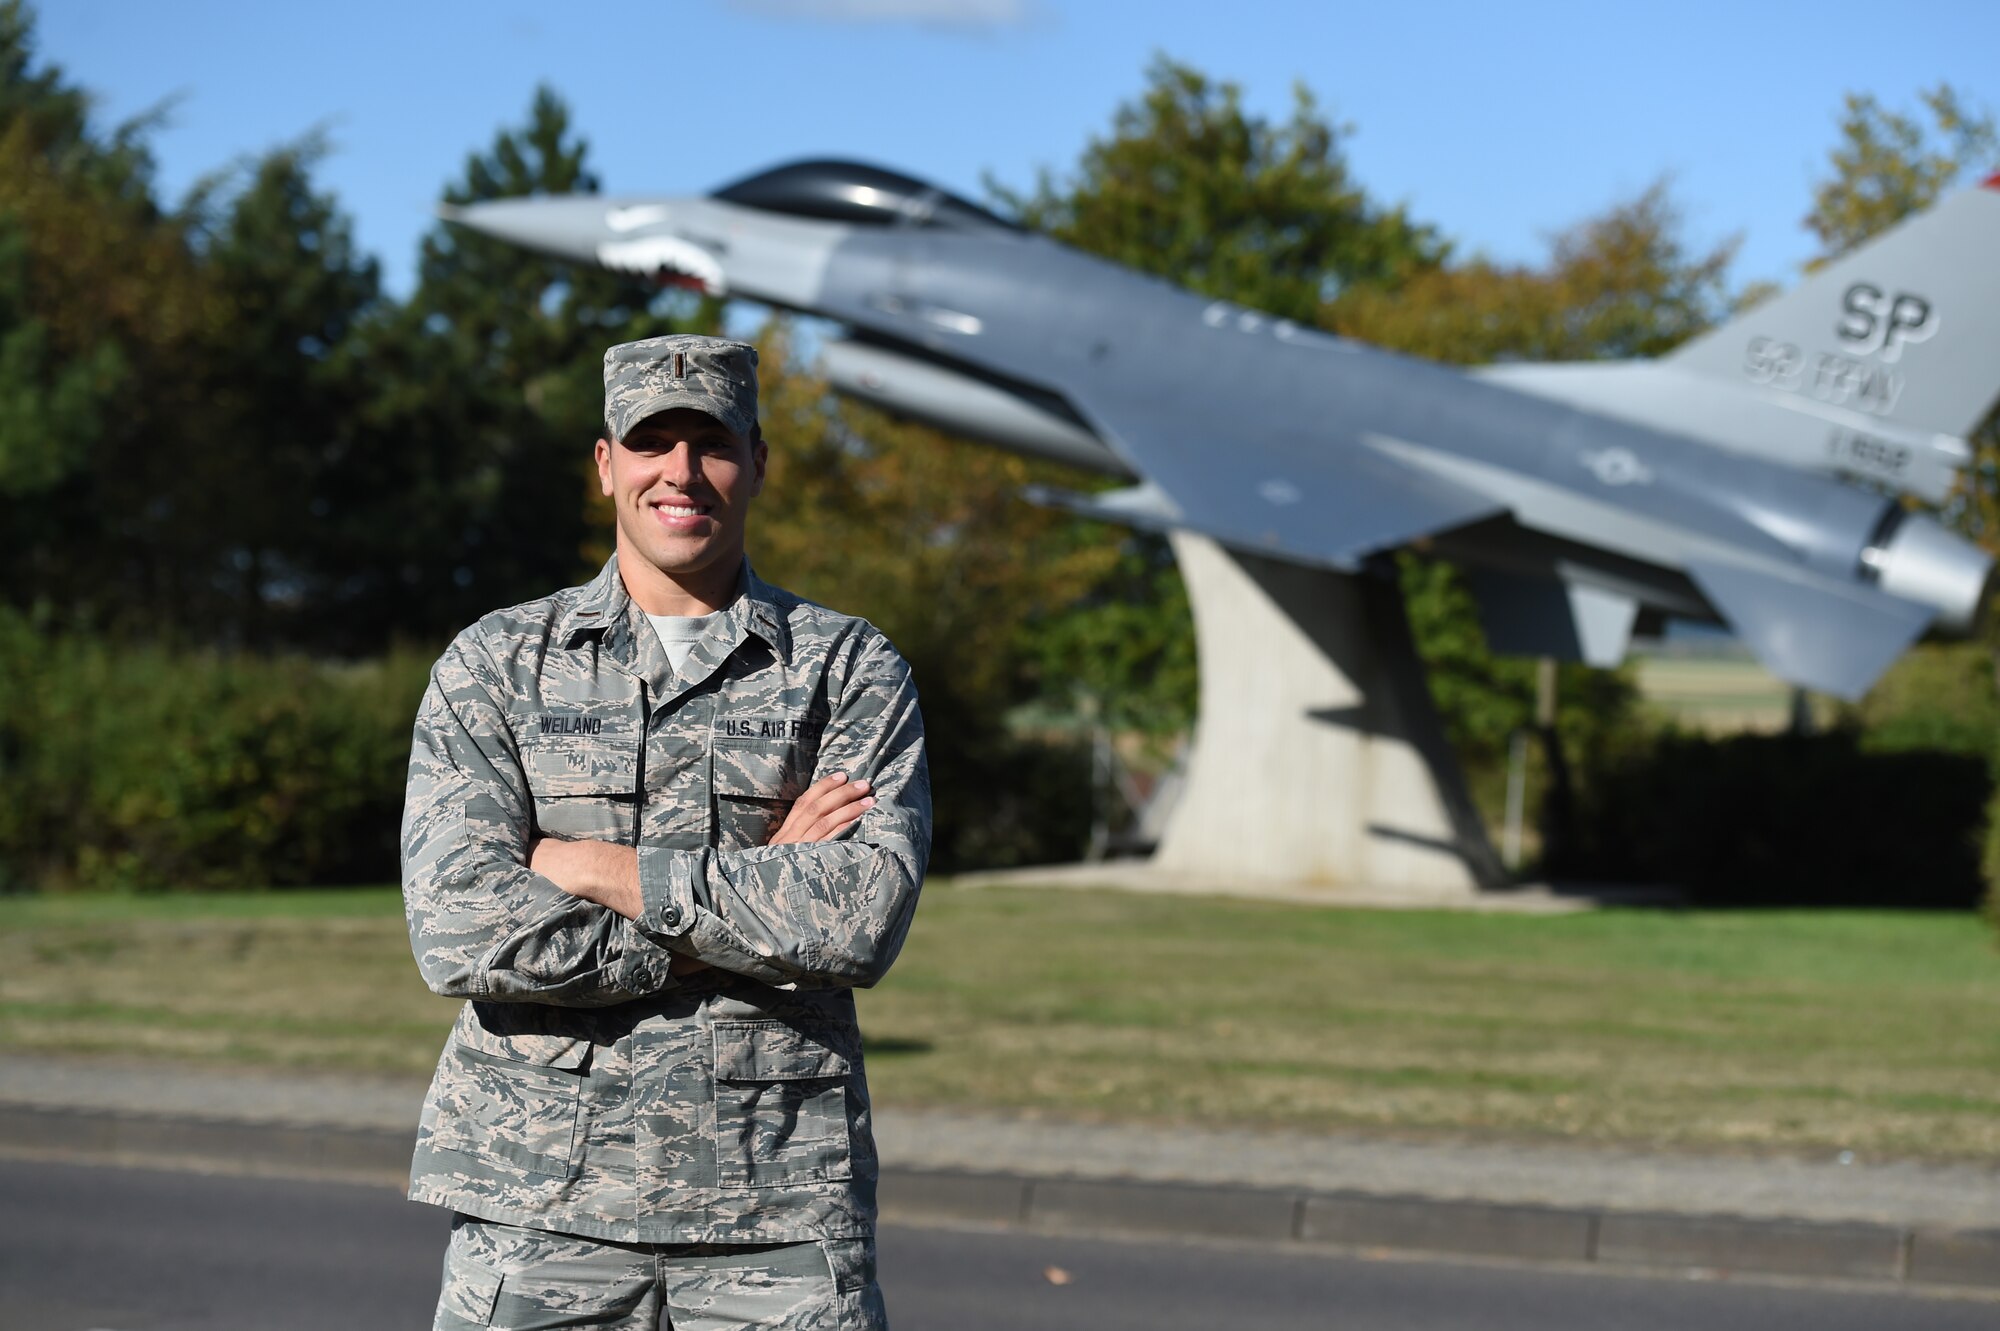 2nd Lt. Nick Weiland poses in front of an F-16 static display at his former unit September 19, 2019, at Spangdahlem Air Base, Germany. Weiland spent two years stationed in Germany as an enlisted Airman and returned in 2019 as an officer with the 132d Logistics Readiness Squadron. (U.S. Air National Guard photo by Staff Sgt. Michael J. Kelly)